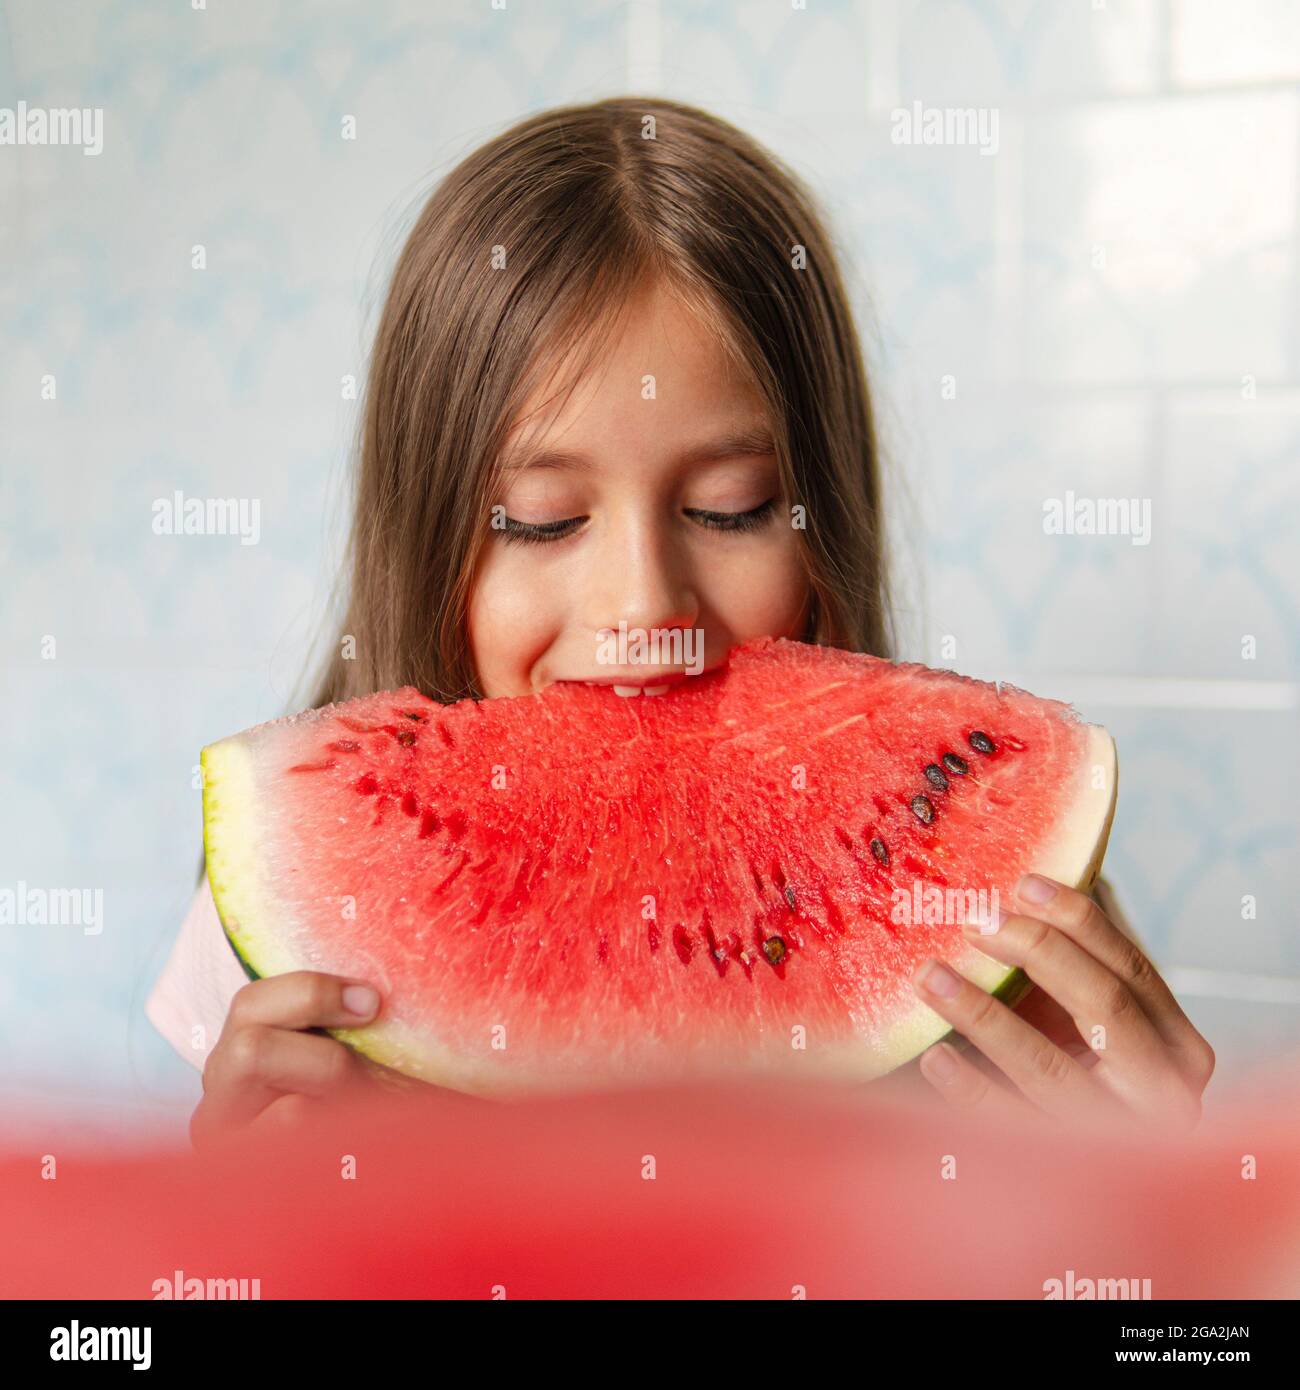 8 years old child eating watermelon at home. A large piece of ripe red watermelon in the hands of a little girl on a blue background. Stock Photo